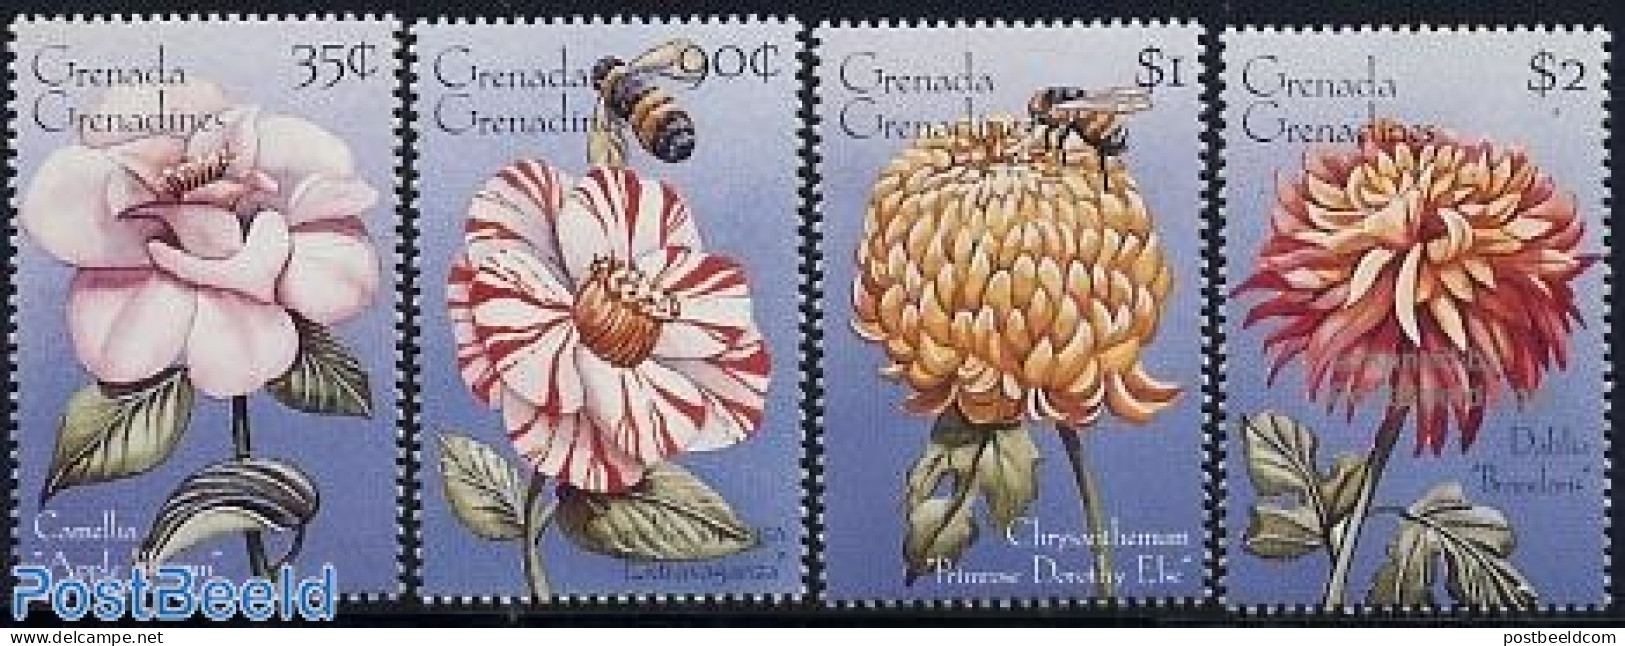 Grenada Grenadines 1996 Flowers 4v, Mint NH, Nature - Flowers & Plants - Insects - Grenada (1974-...)